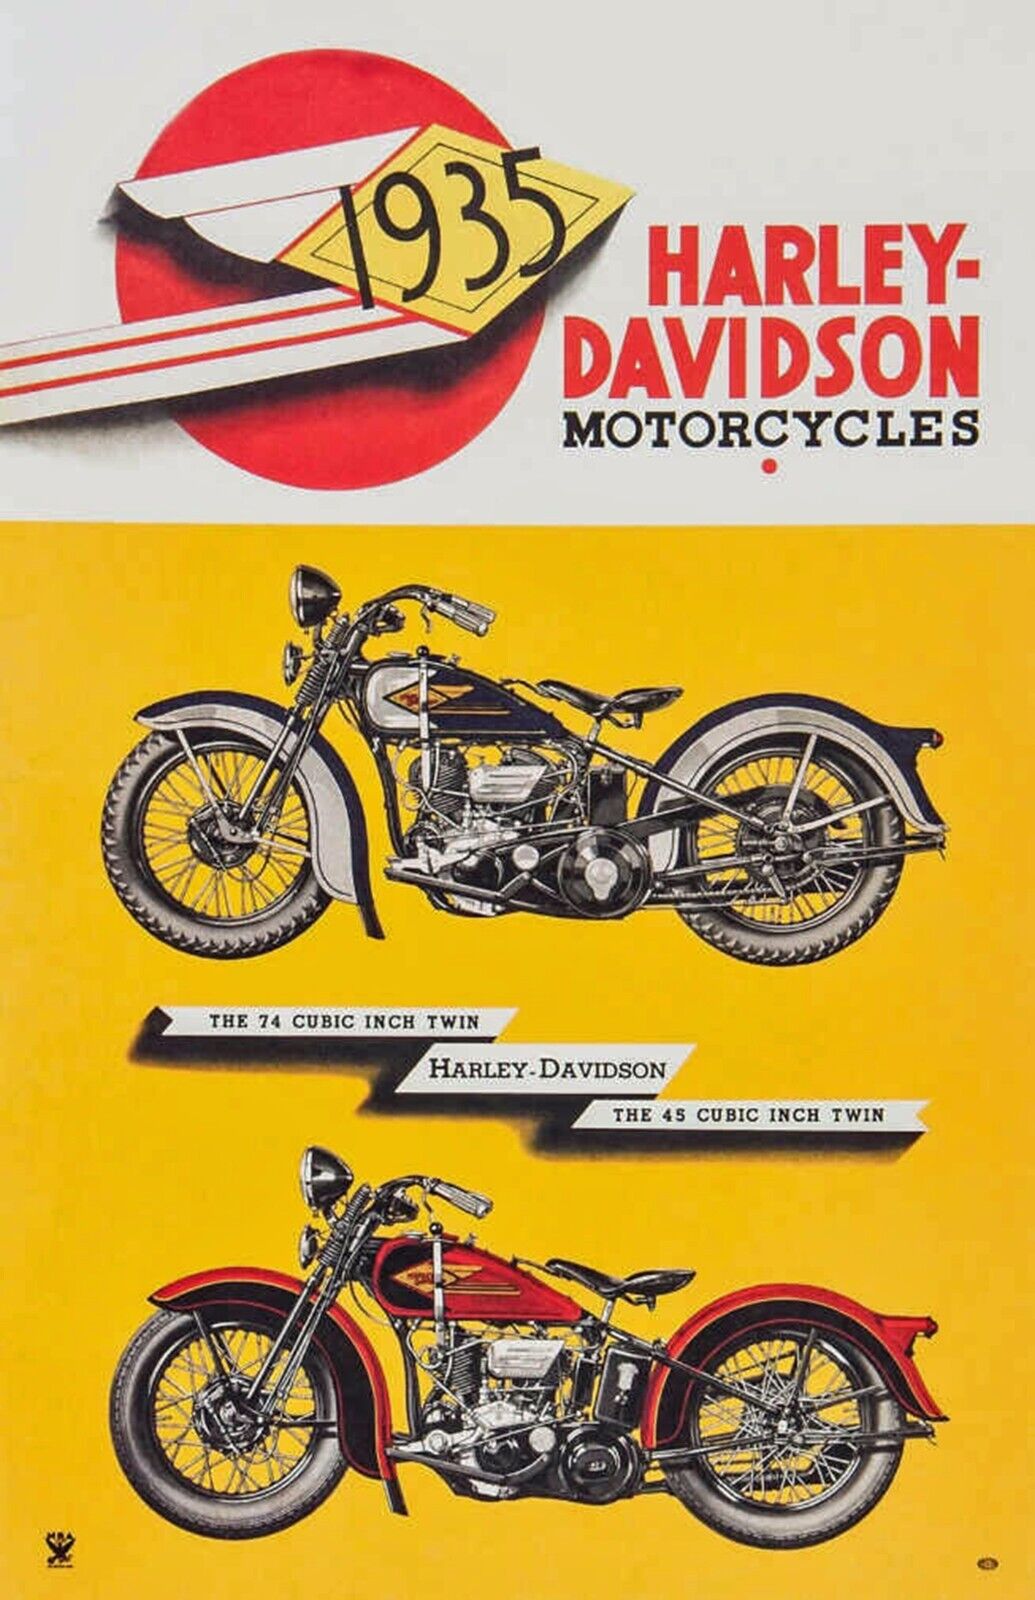 AWESOME VINTAGE HARLEY DAIVDSON MOTORCYCLE 1935 POSTER